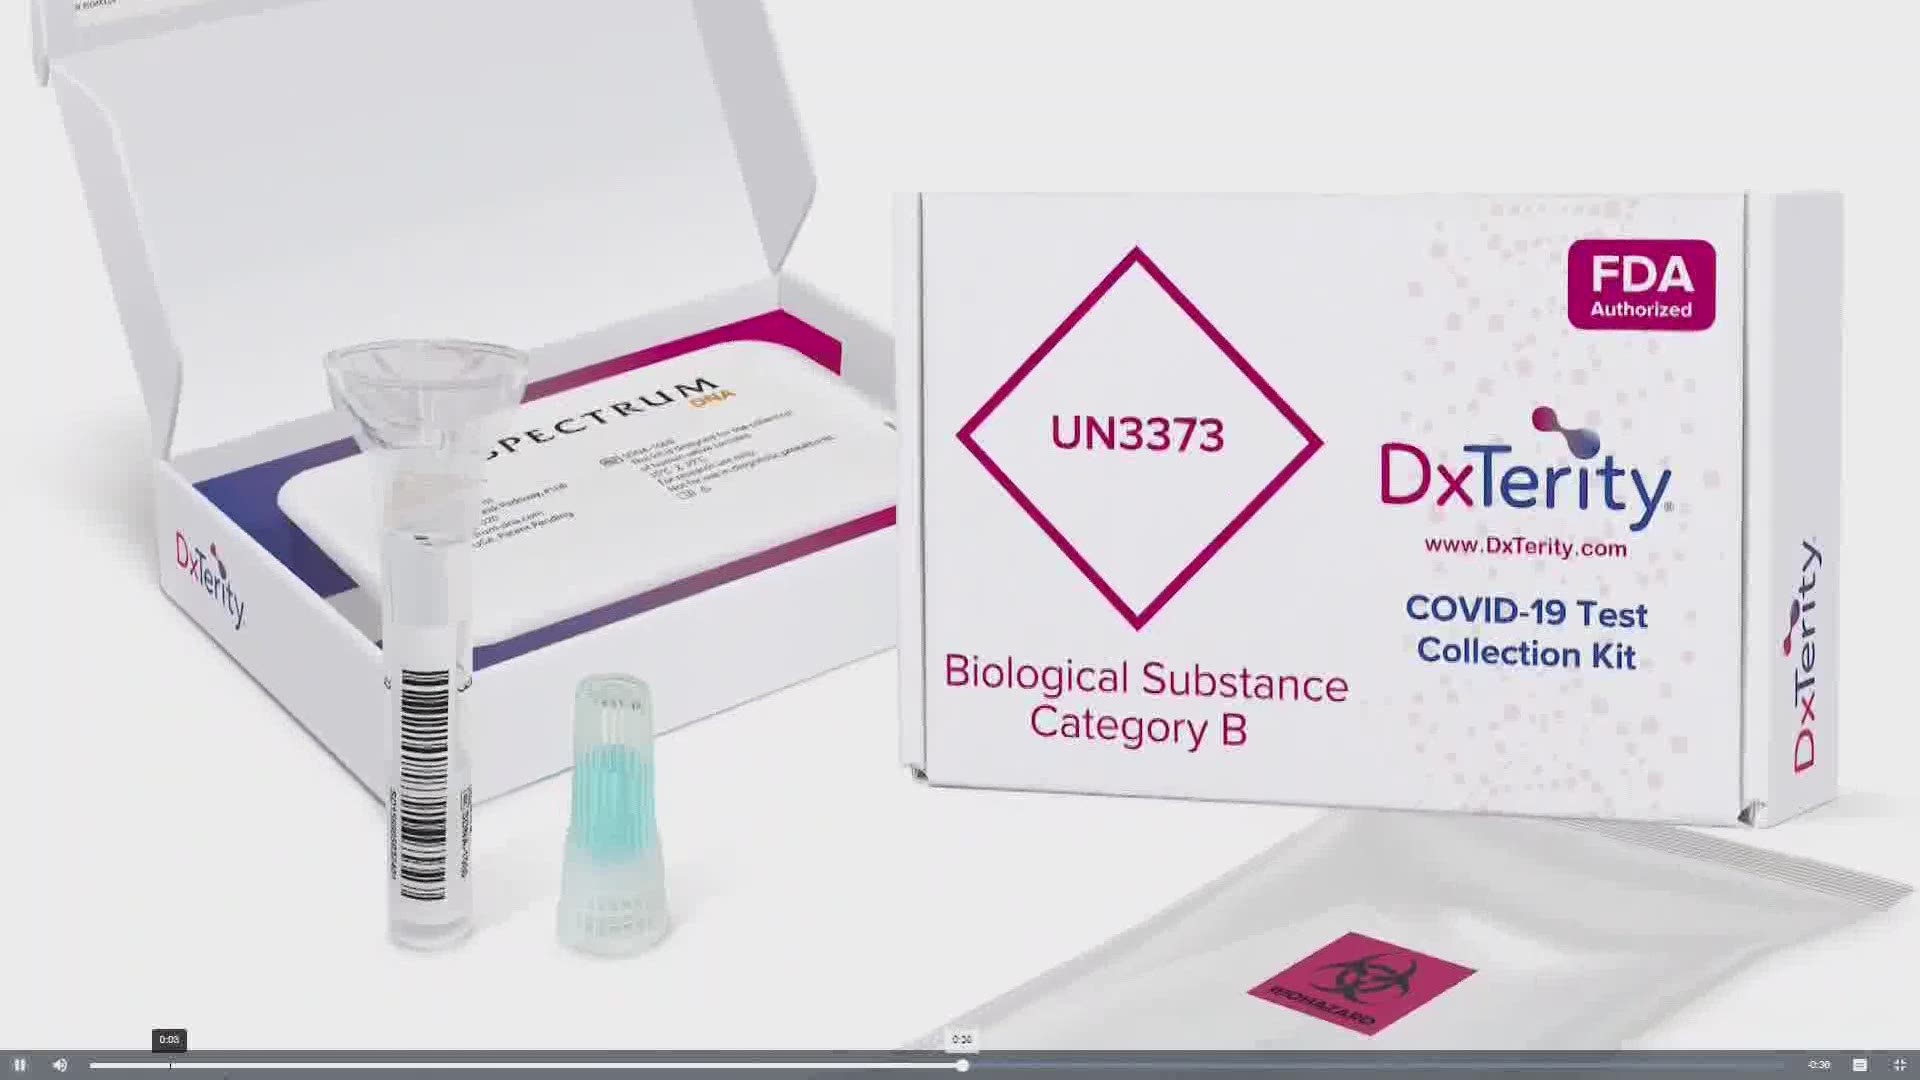 Amazon is partnering with DxTerity to sell at-home COVID-19 saliva tests.